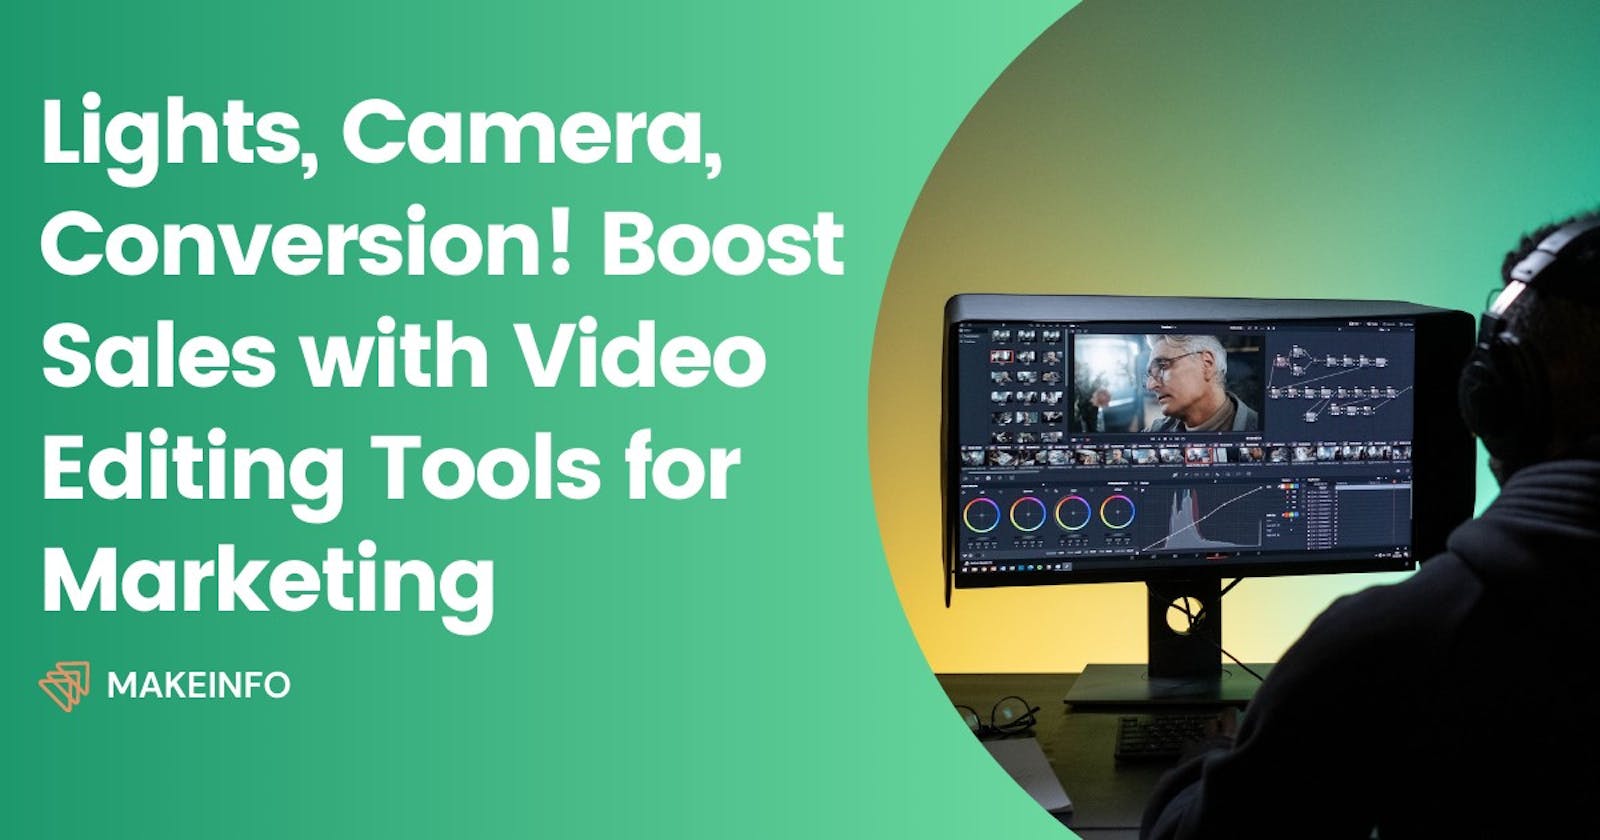 Useful Video Editing Tools for Small Business Marketing